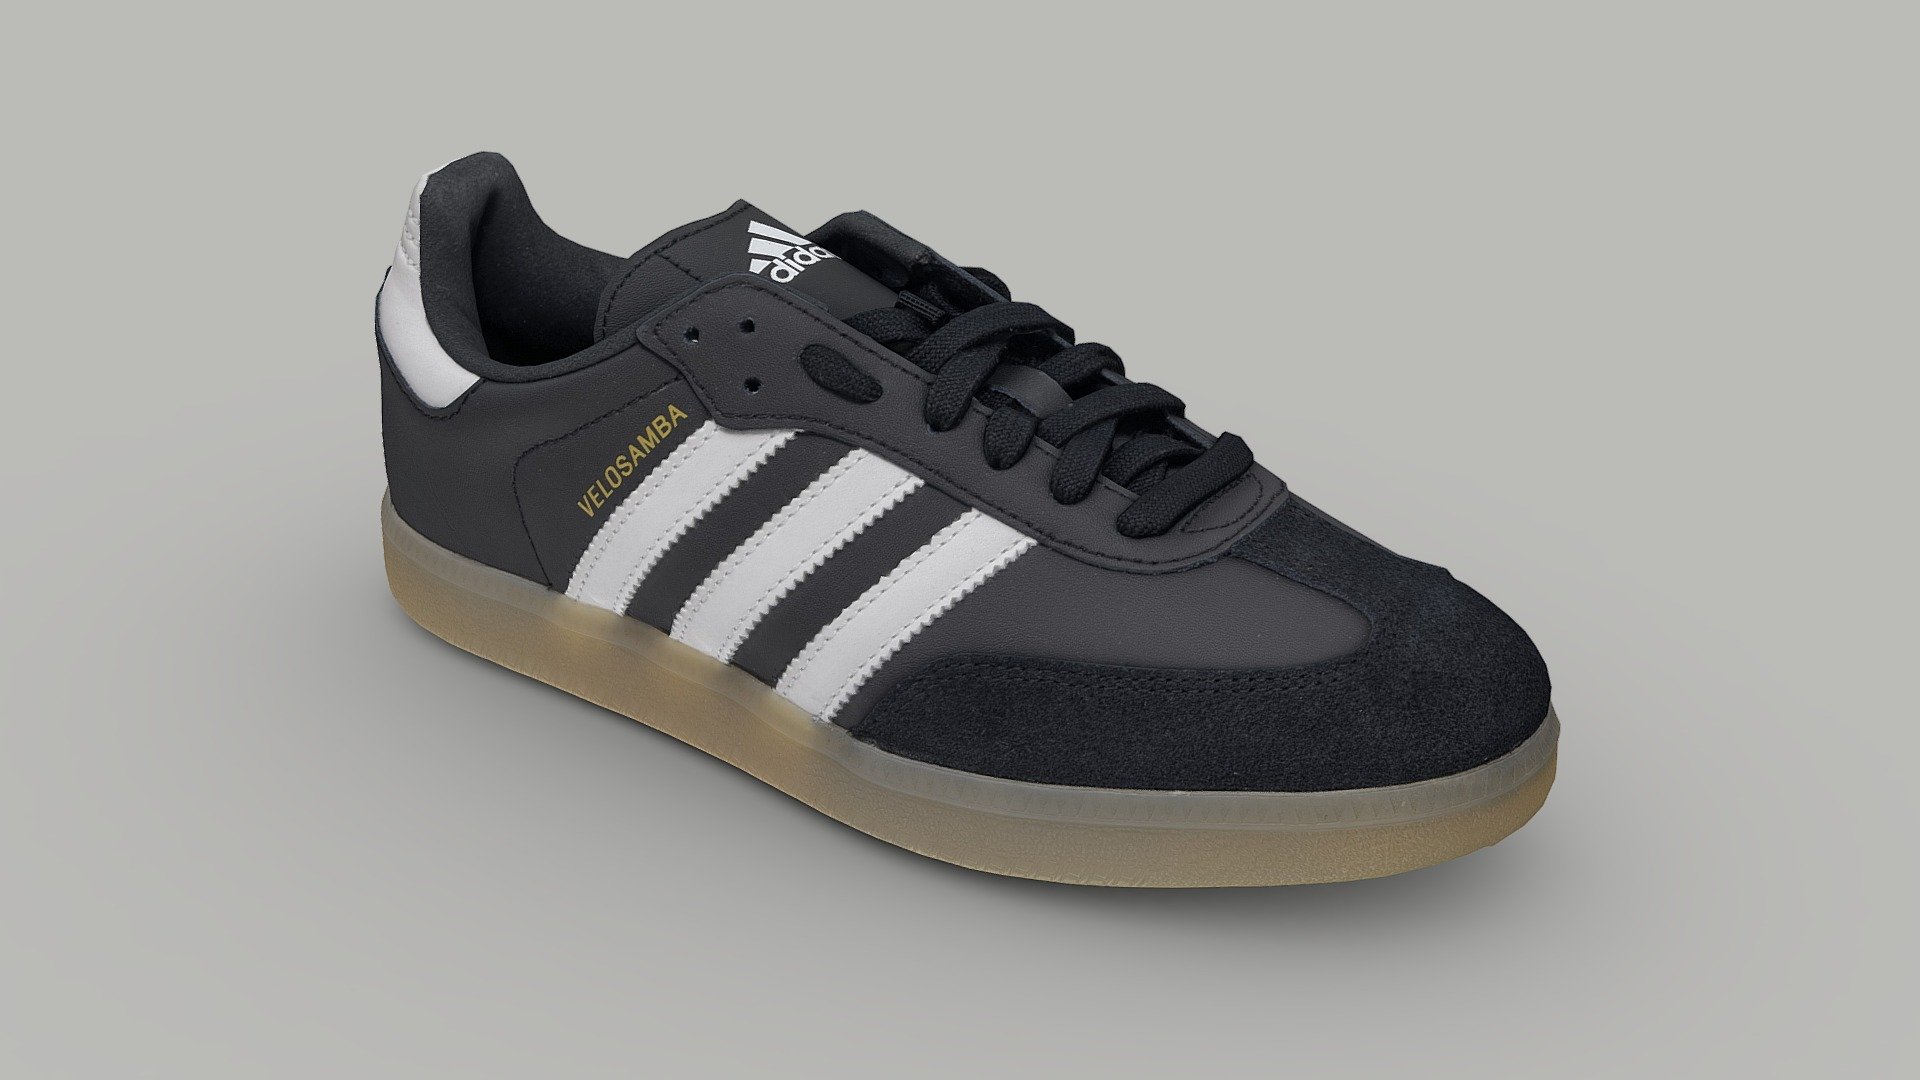 Photogrammetry 3D model of Adidas Velosamba.

After a long time outside of the cycling shoe business, adidas has merged his iconic tennis shoe from the 50s called Samba with the cycling culture. 
The results is this model that can be used for mtb, road bikes , indoor training and commuting, while maintaining a classic look.
It has a stiff sole and is ready for SPD pedals 3d model